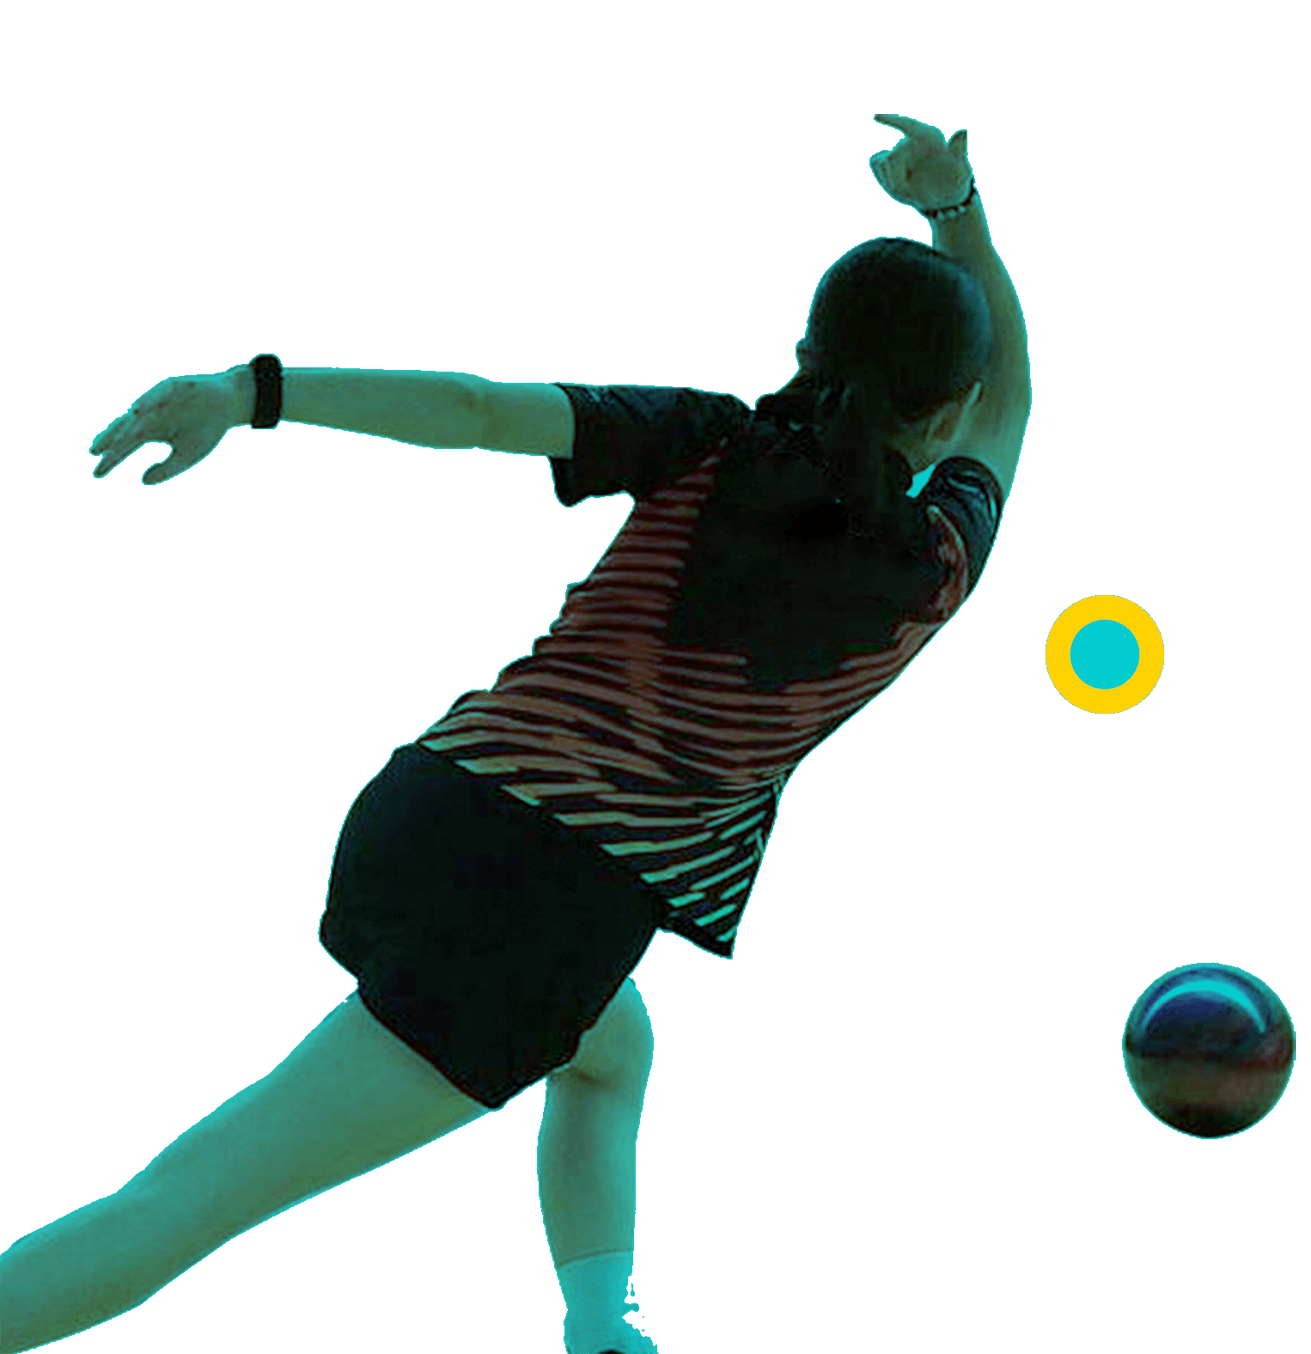 In the picture, a female player is tilted and throwing the bowling ball.